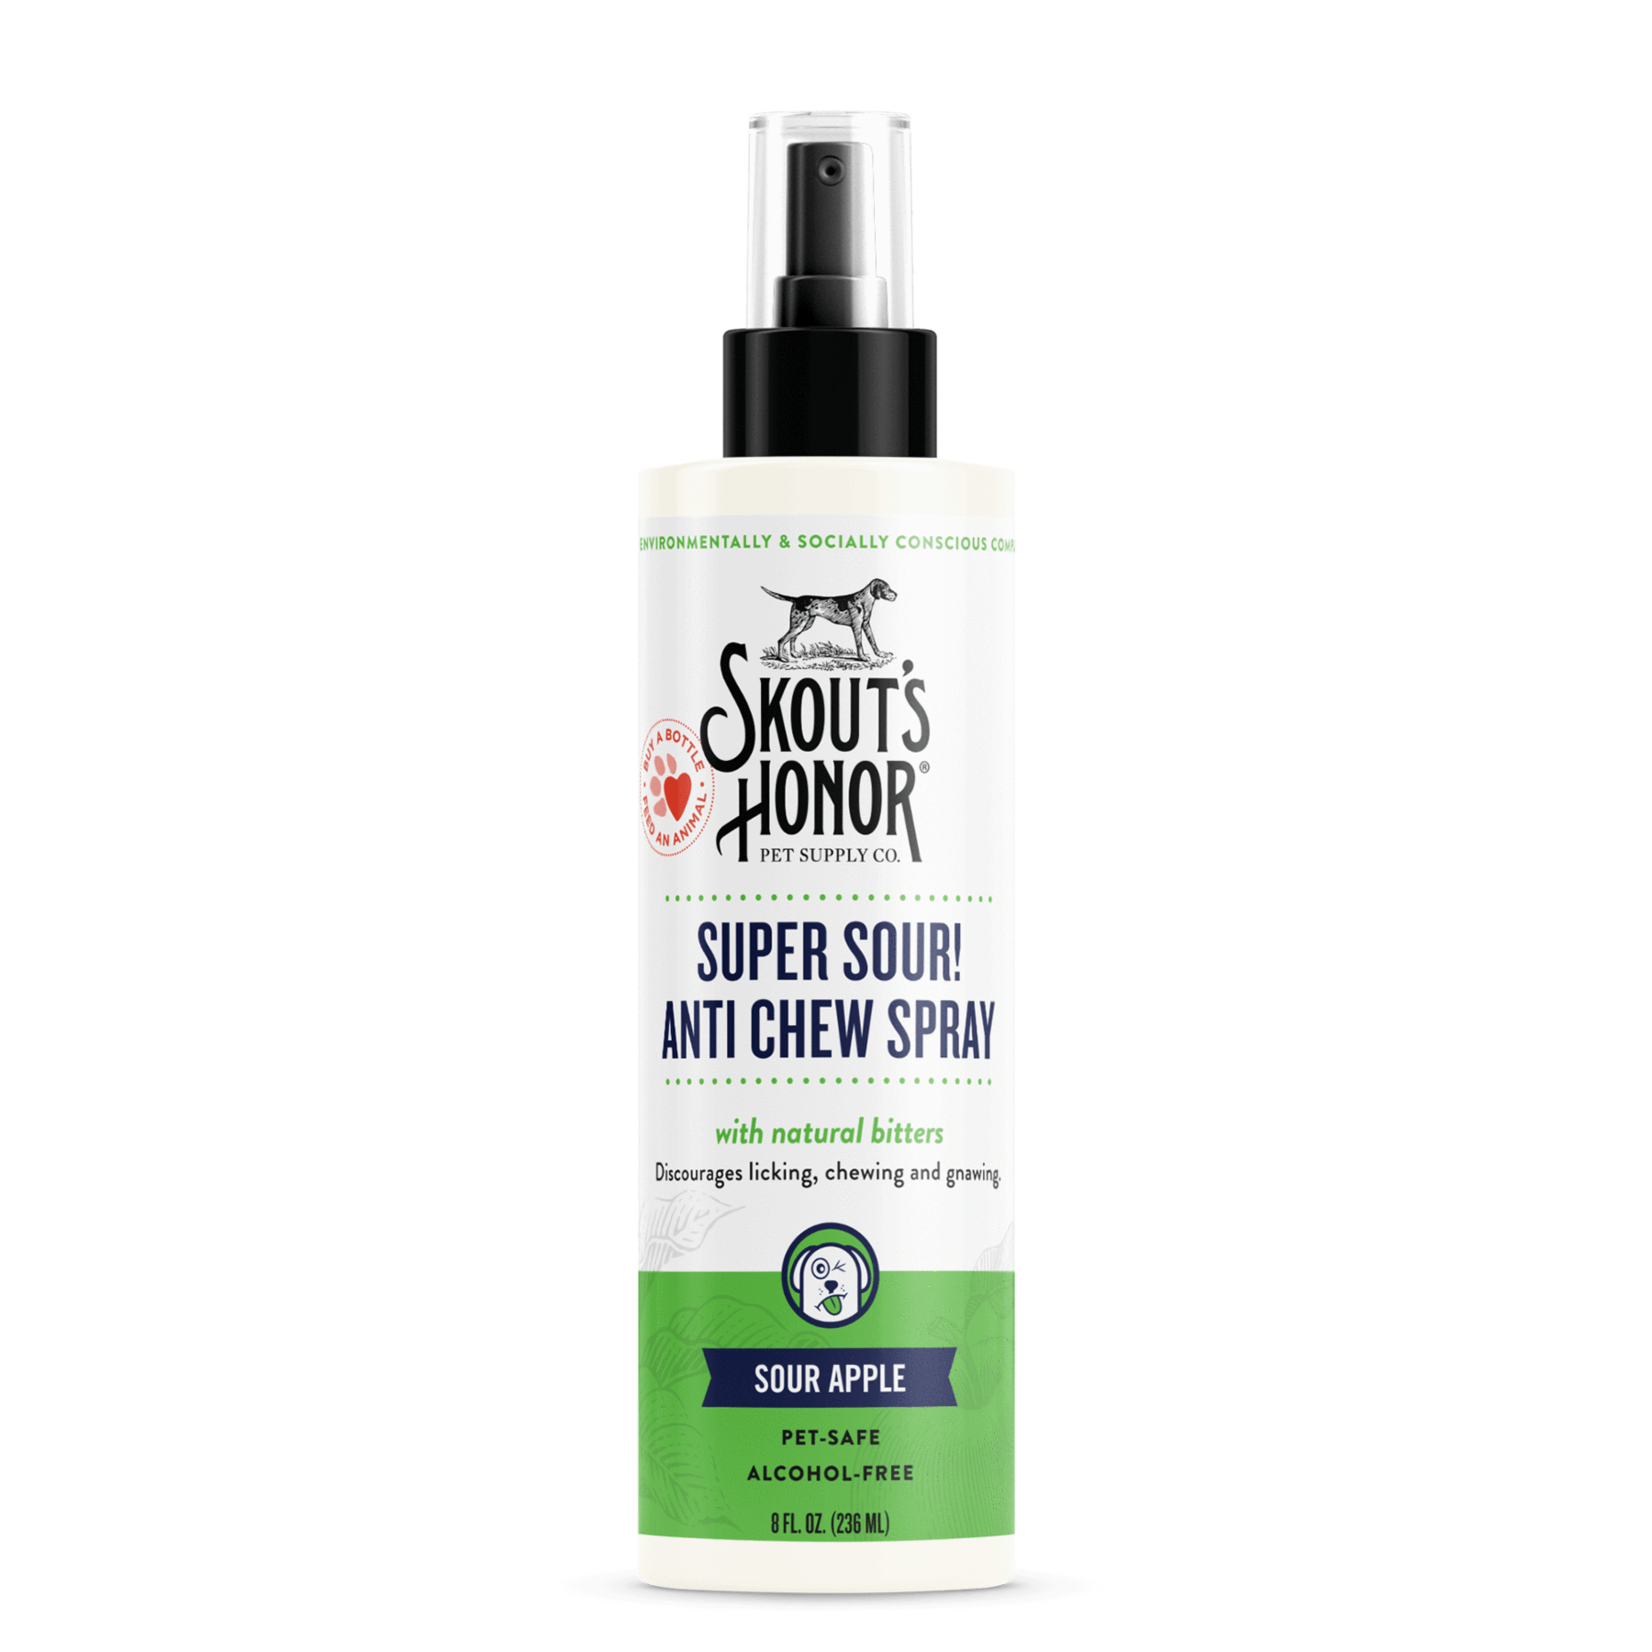 Skouts Honor Skout's Honor Super Sour Anti Chew Spray with Natural Bitters 8oz